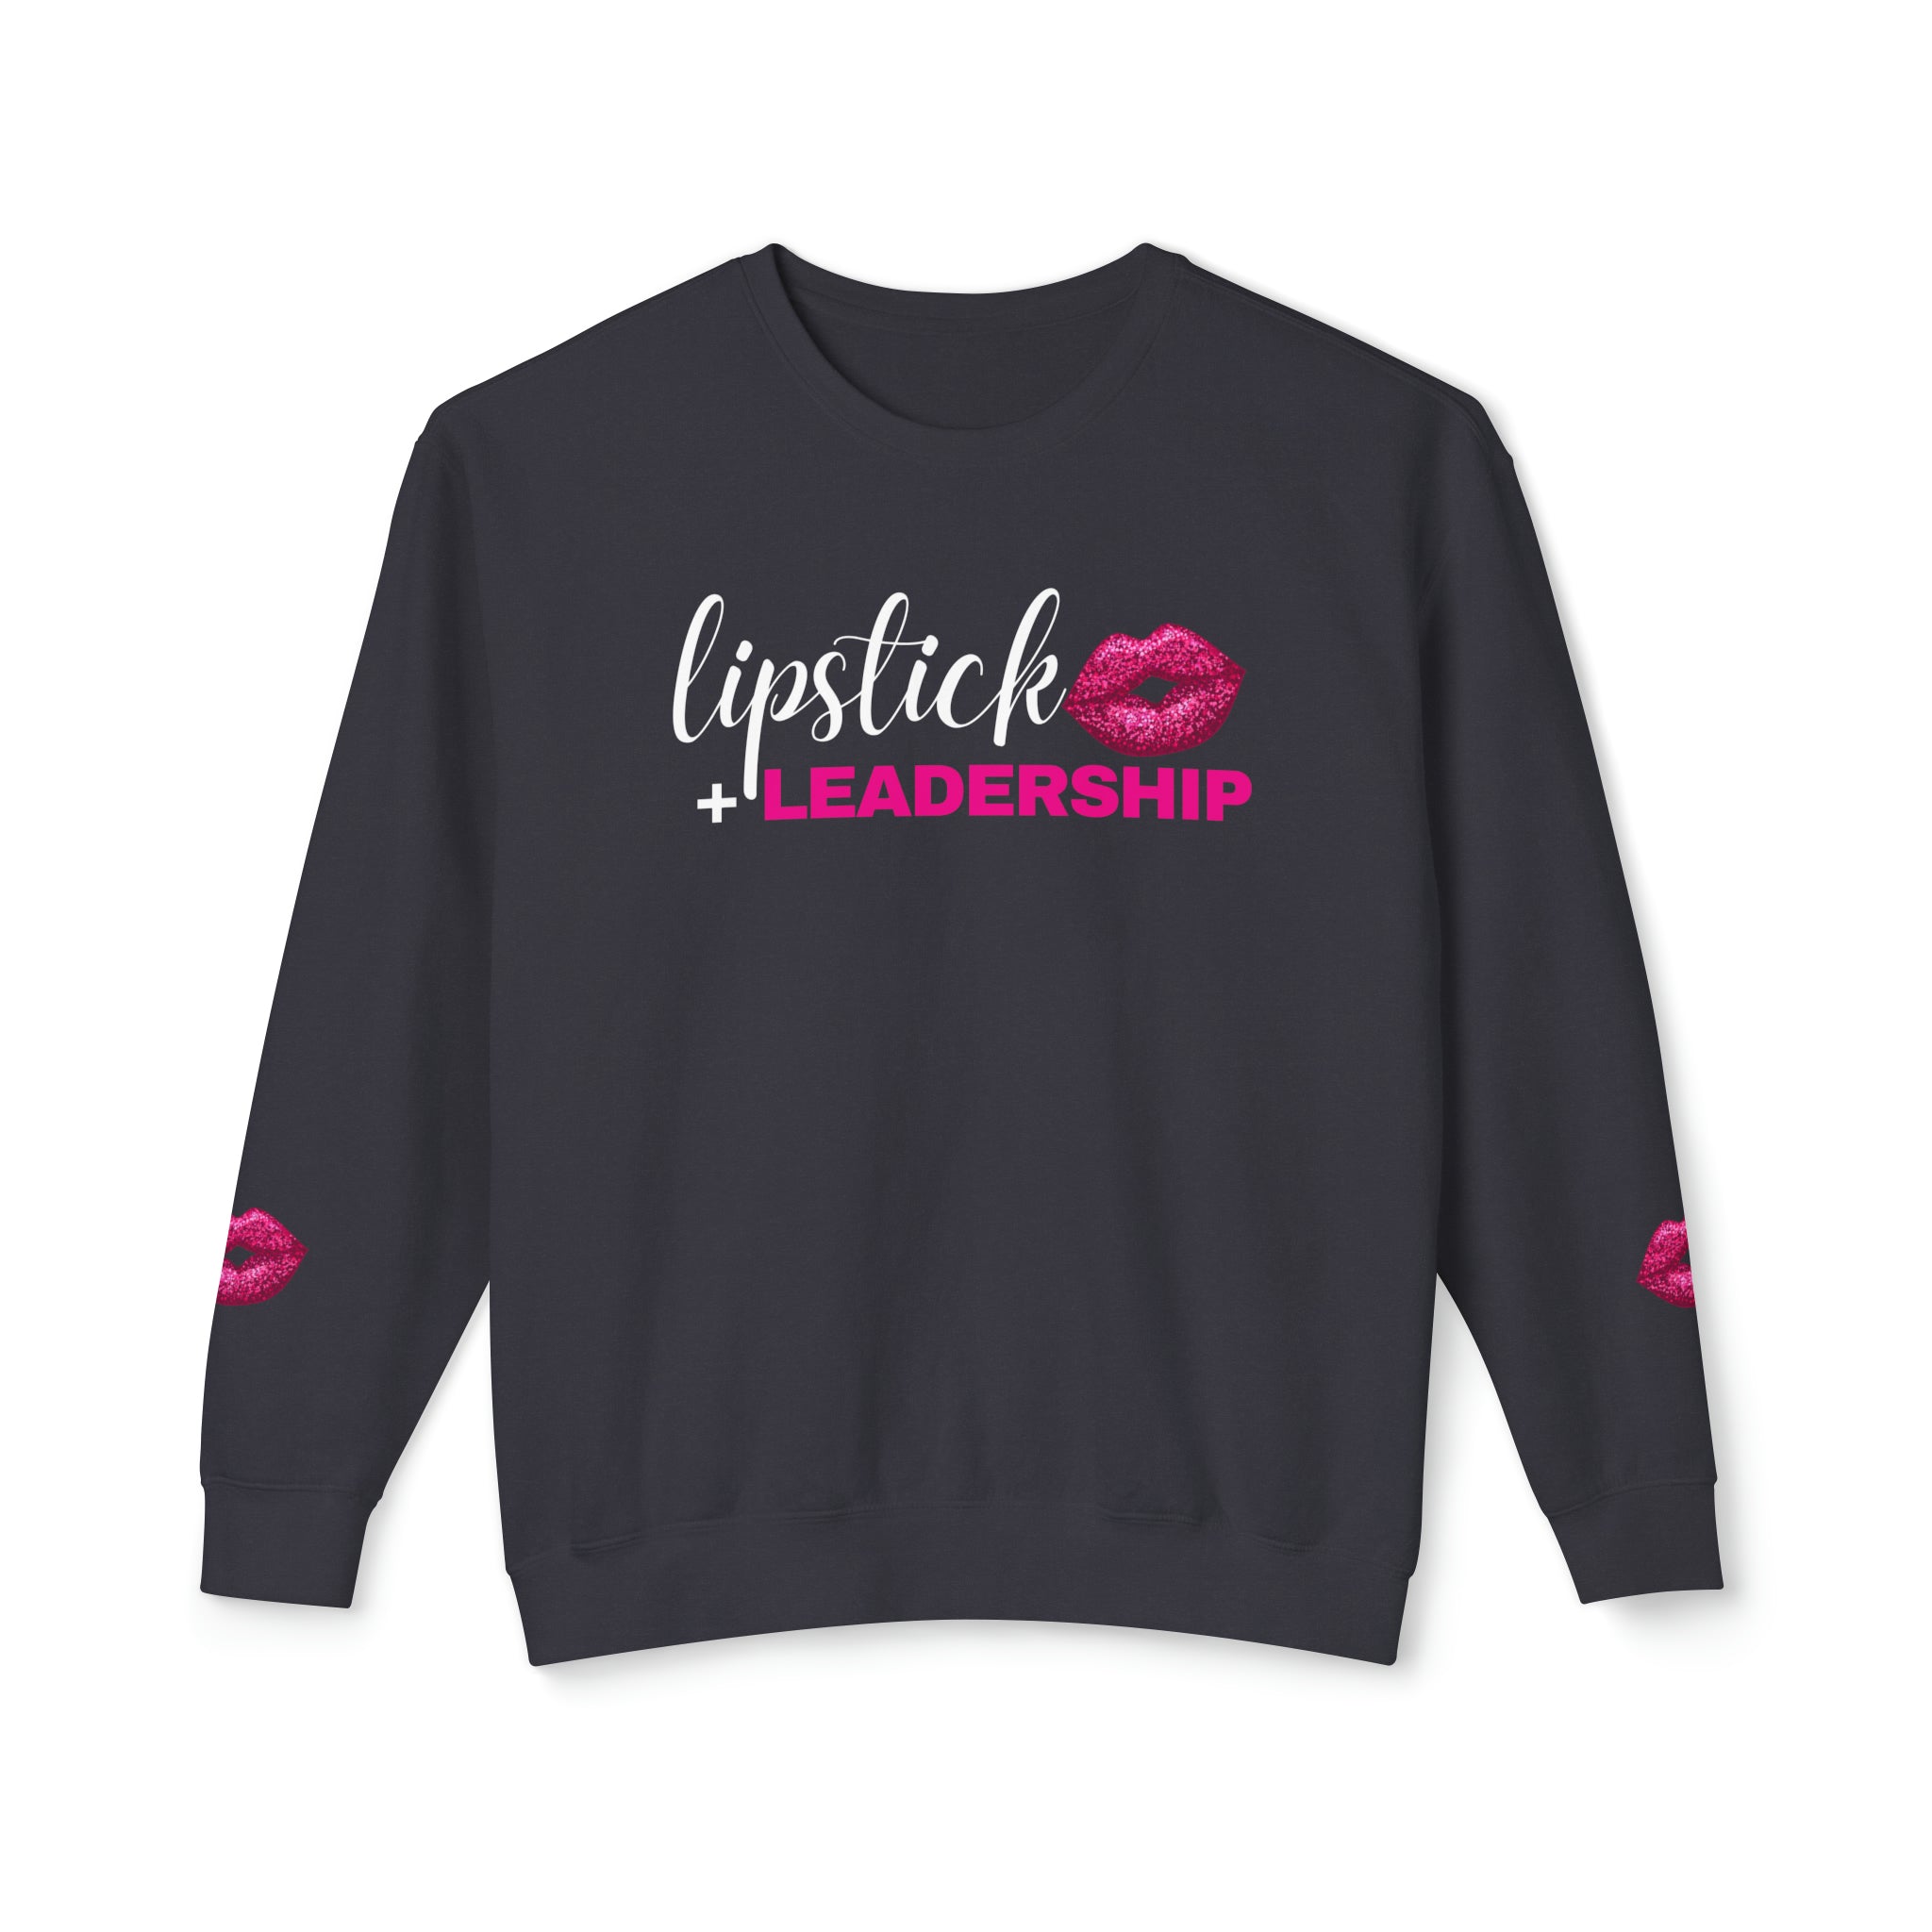 Lipstick + Leadership (Pink Sparkle Lips) Relaxed Fit Lightweight Crewneck Sweatshirt, Makeup Sweatshirt, Beauty Business Sweatshirt Sweatshirt Black-3XL The Middle Aged Groove